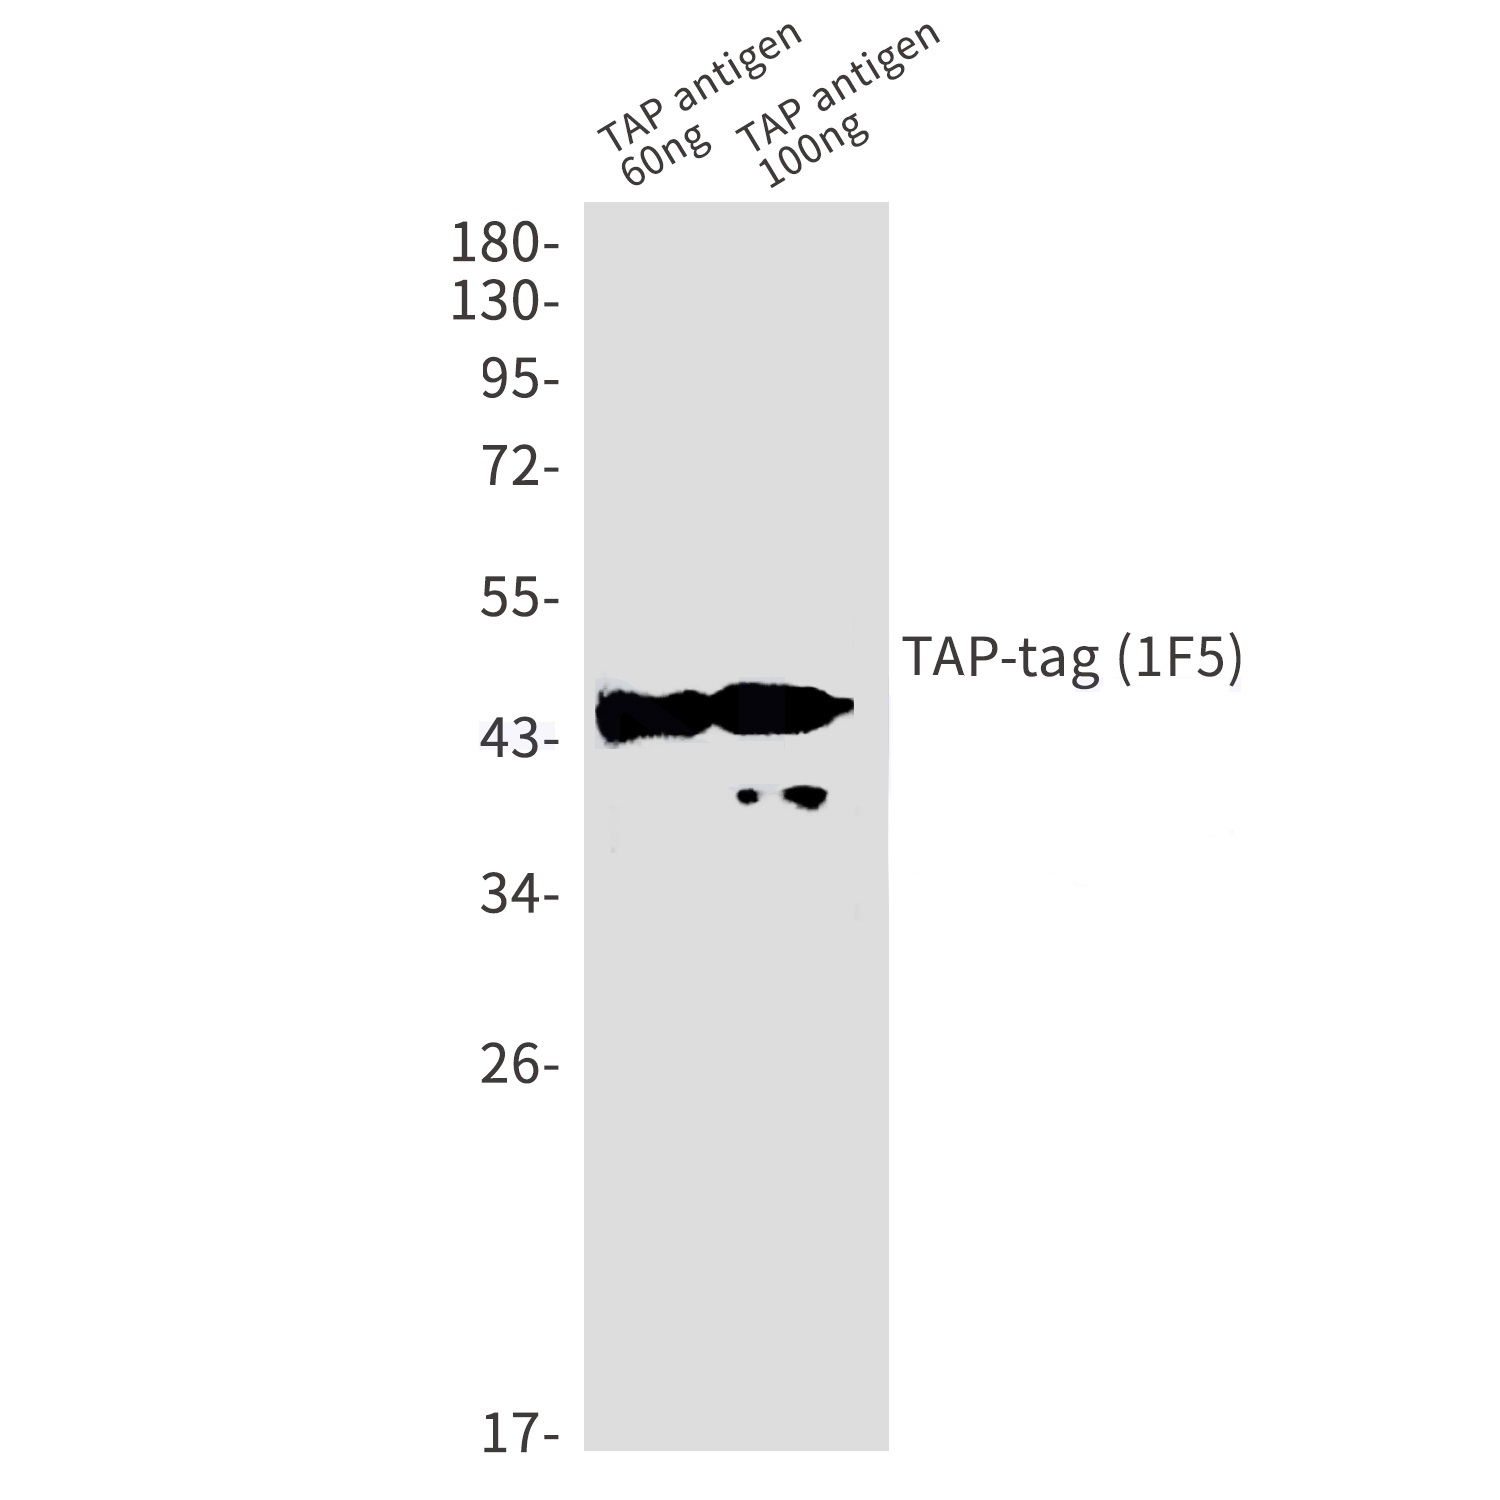 Western blot analysis of TAPtag (1F5) in TAP antigen 60ng，TAP antigen 100ng lysates using TAPtag (1F5) antibody.